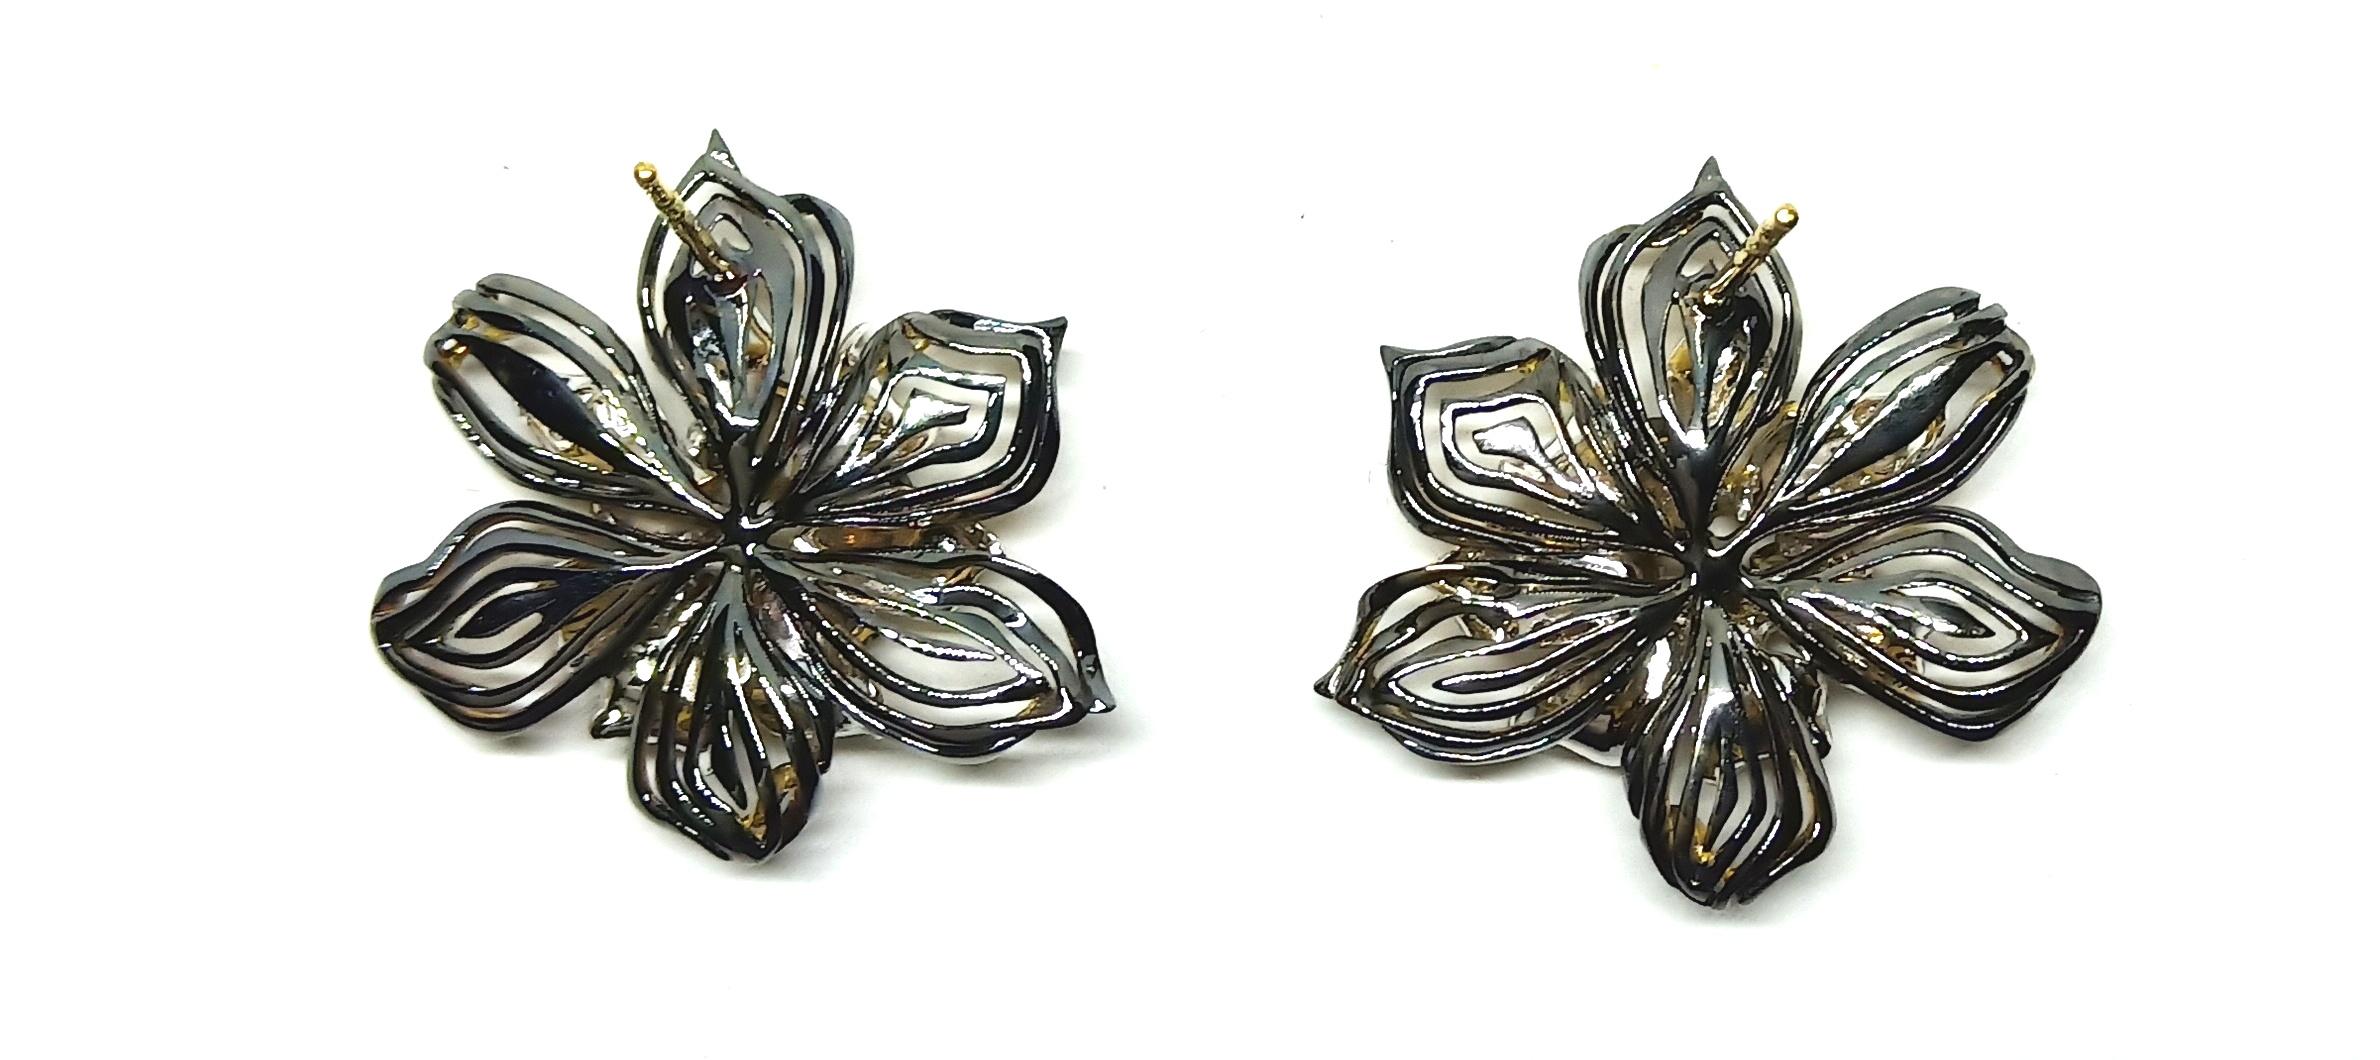 Contemporary Art One of a Kind Diamond Yellow and White Gold Clip-On Earrings For Sale 2